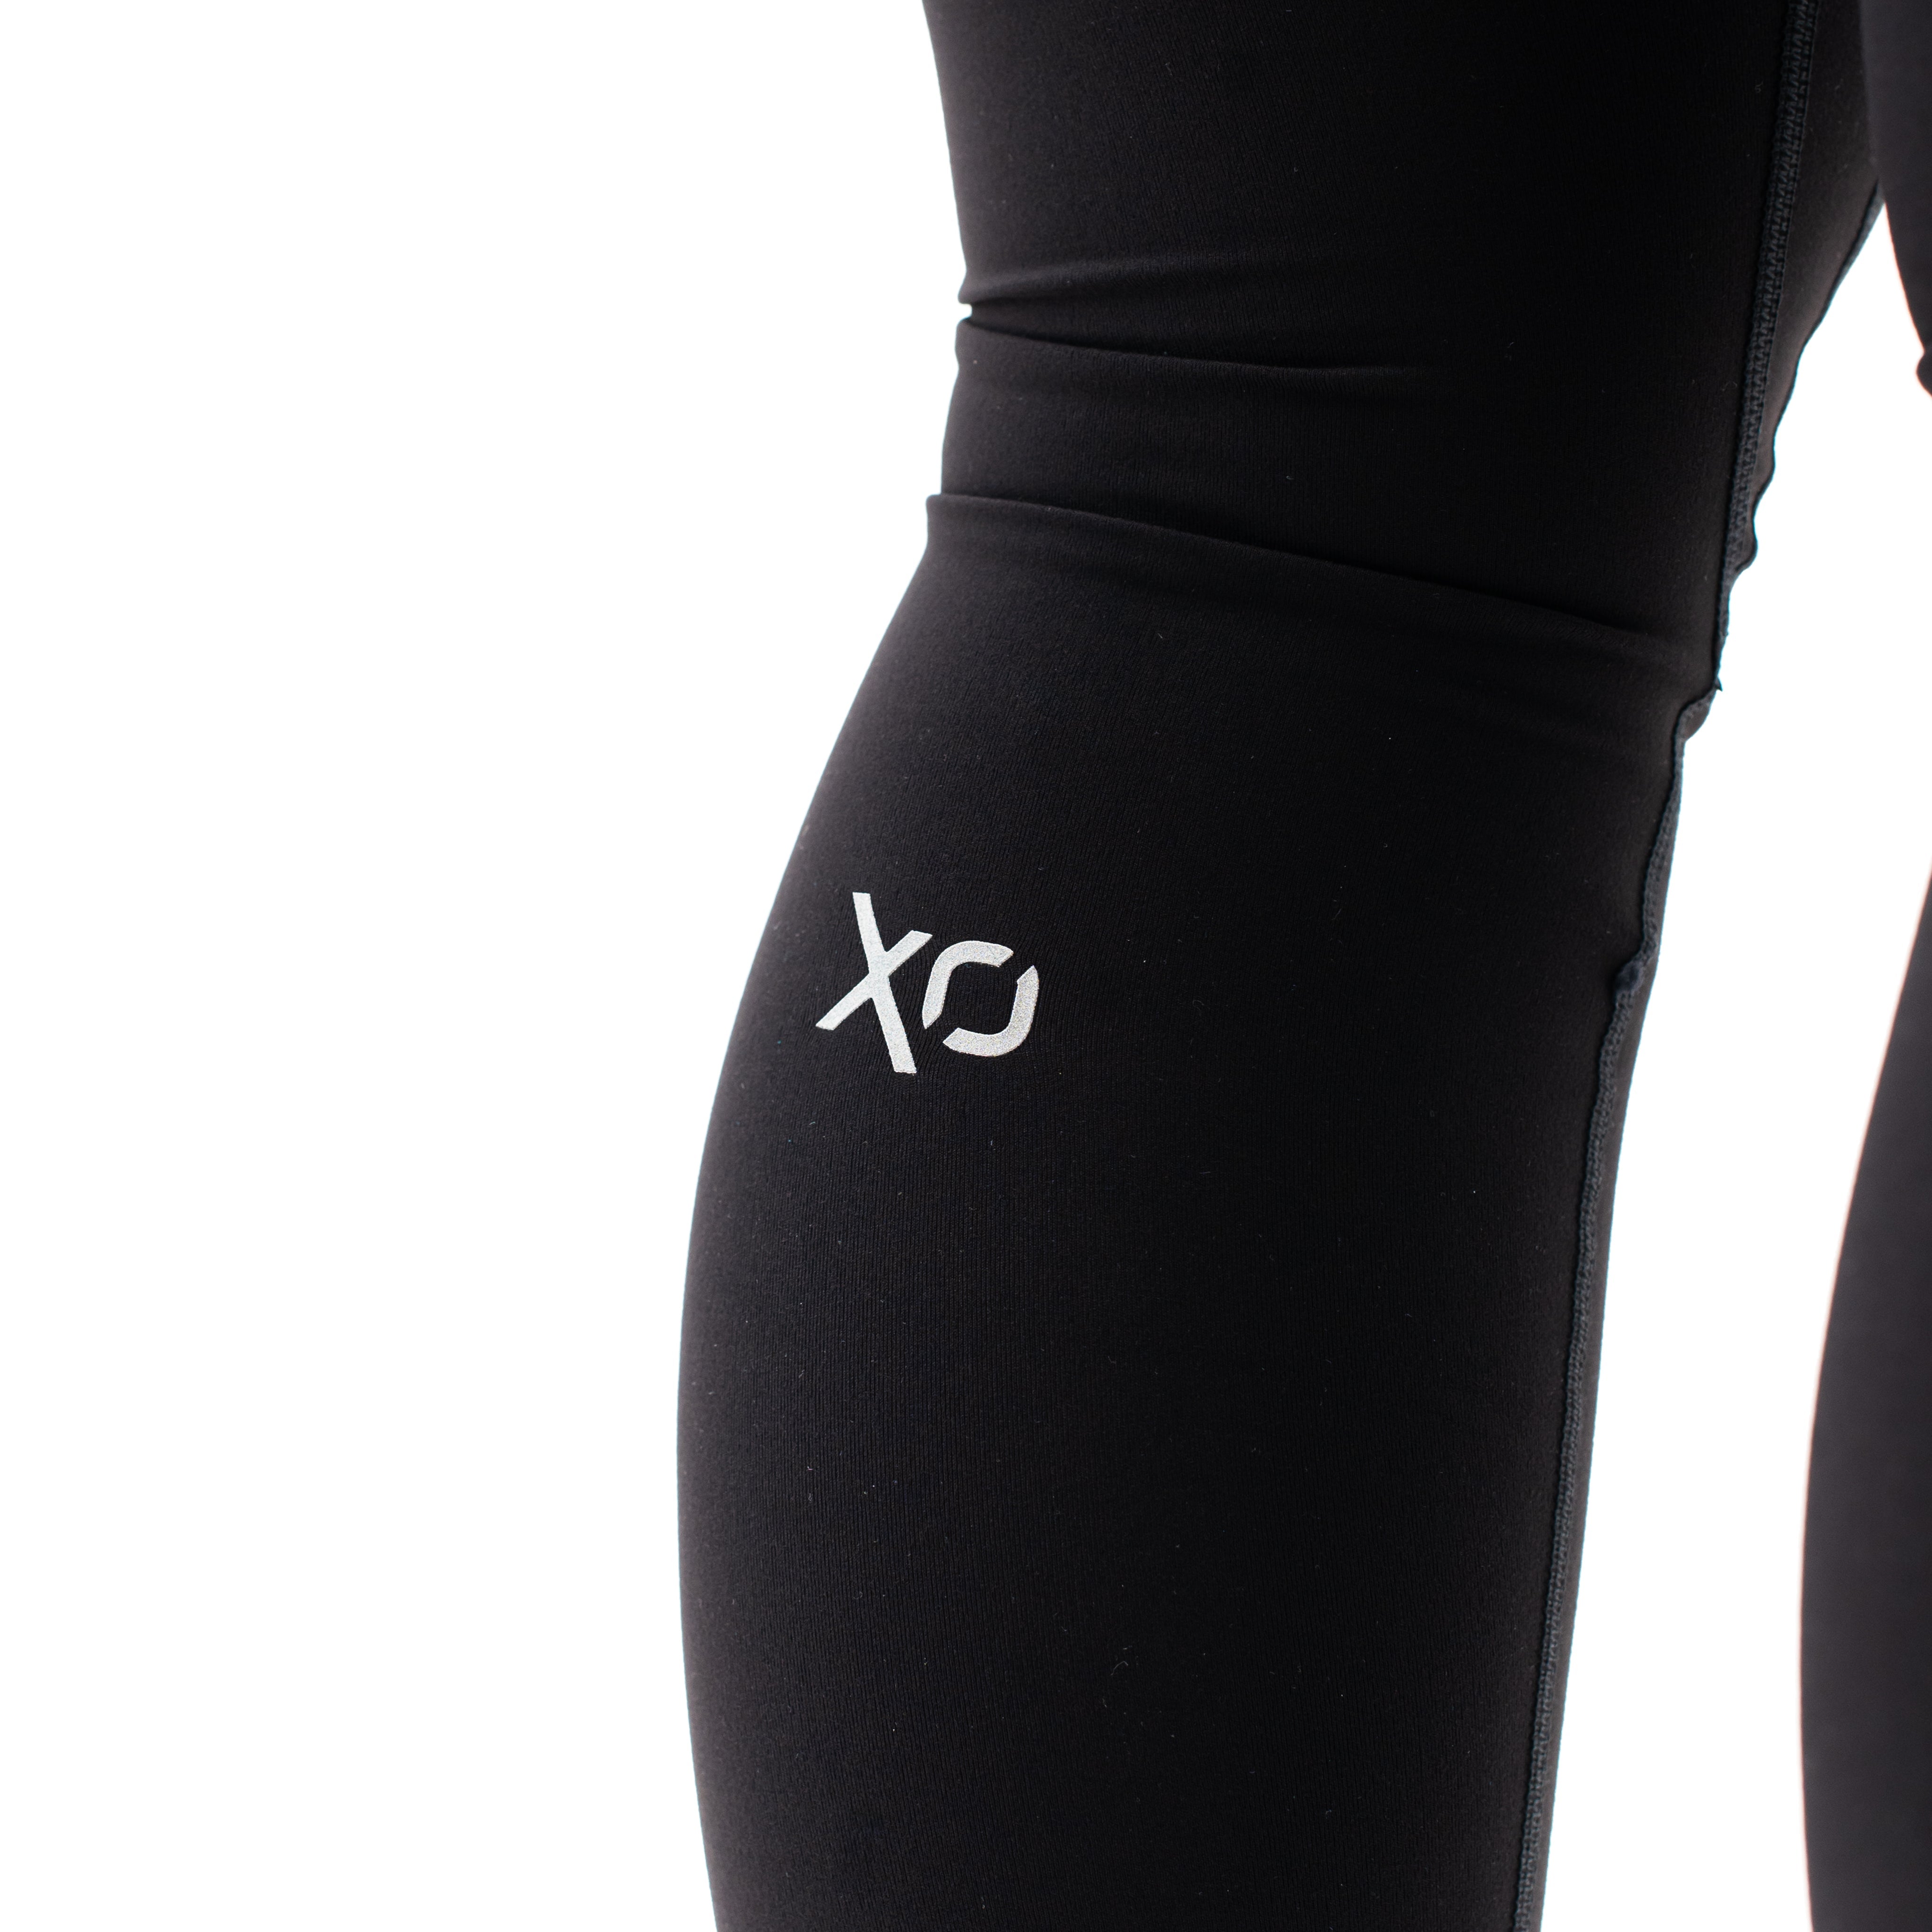 A7 XO Hew Leggings made from the same material as our XO Leggings, but are designed for 'thiccer' body types. The A7 XO Hew have high waistband to be more slimming around your waist and belly and have no seam line on the front for more comfortable movement. Purchase A7 XO Hew Leggings from A7 UK for shipping to UK and Europe. Women’s leggings for powerlifting and training in the gym. Weightlifting leggings for women. 